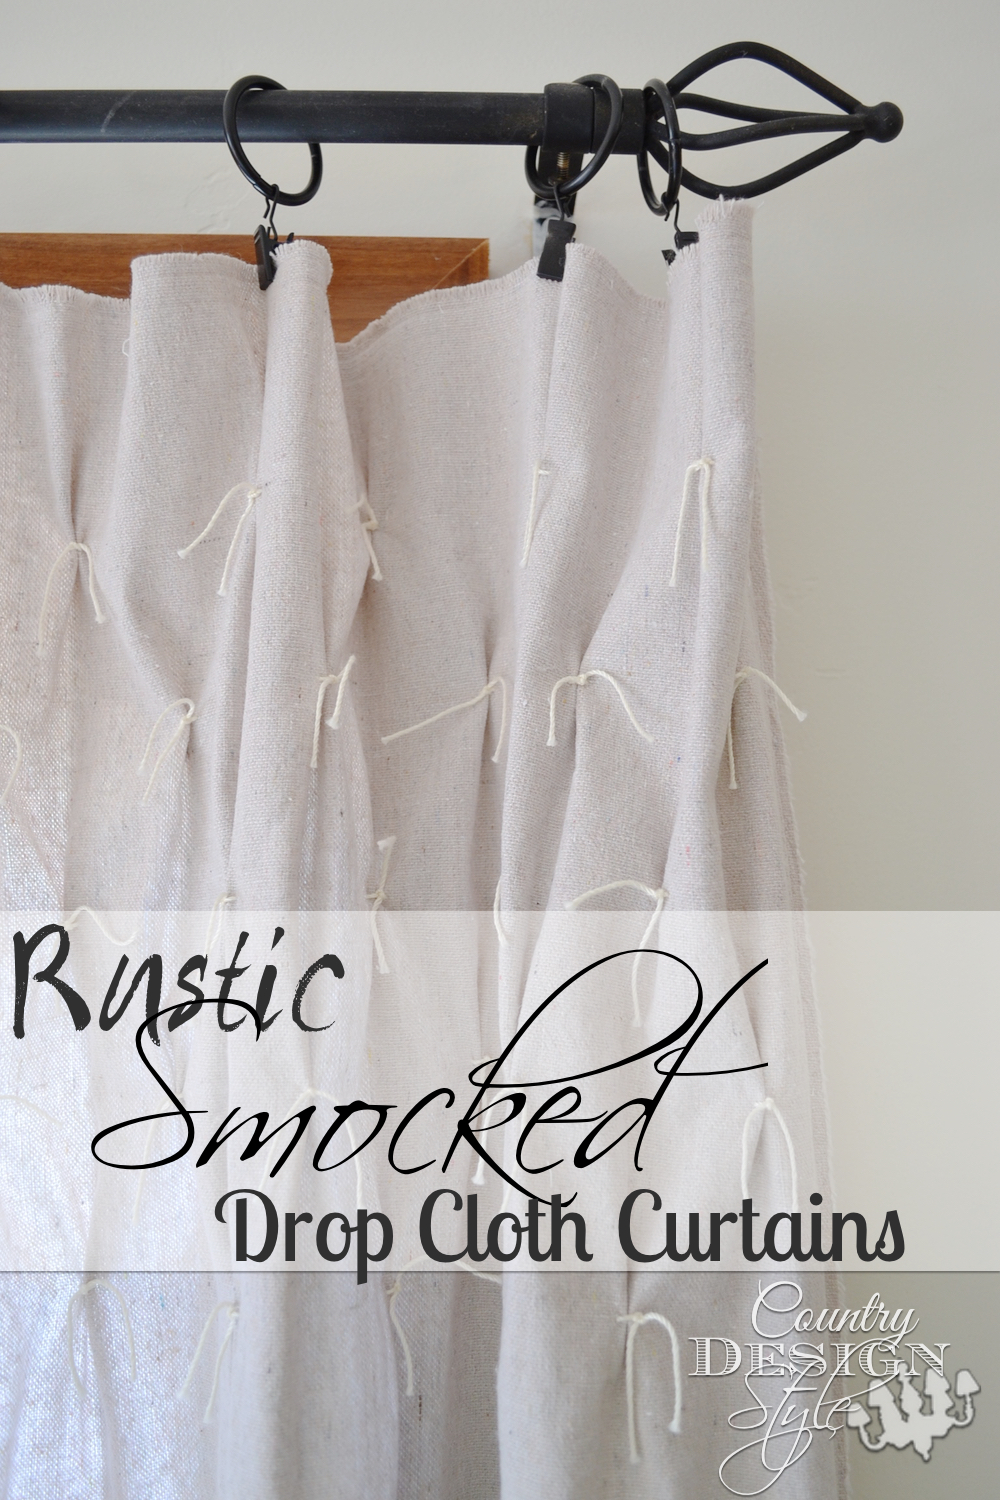 Need inexpensive curtains? Try drop cloth for curtains & add smocking to take the drop cloth look out!!! :) Country Design Style